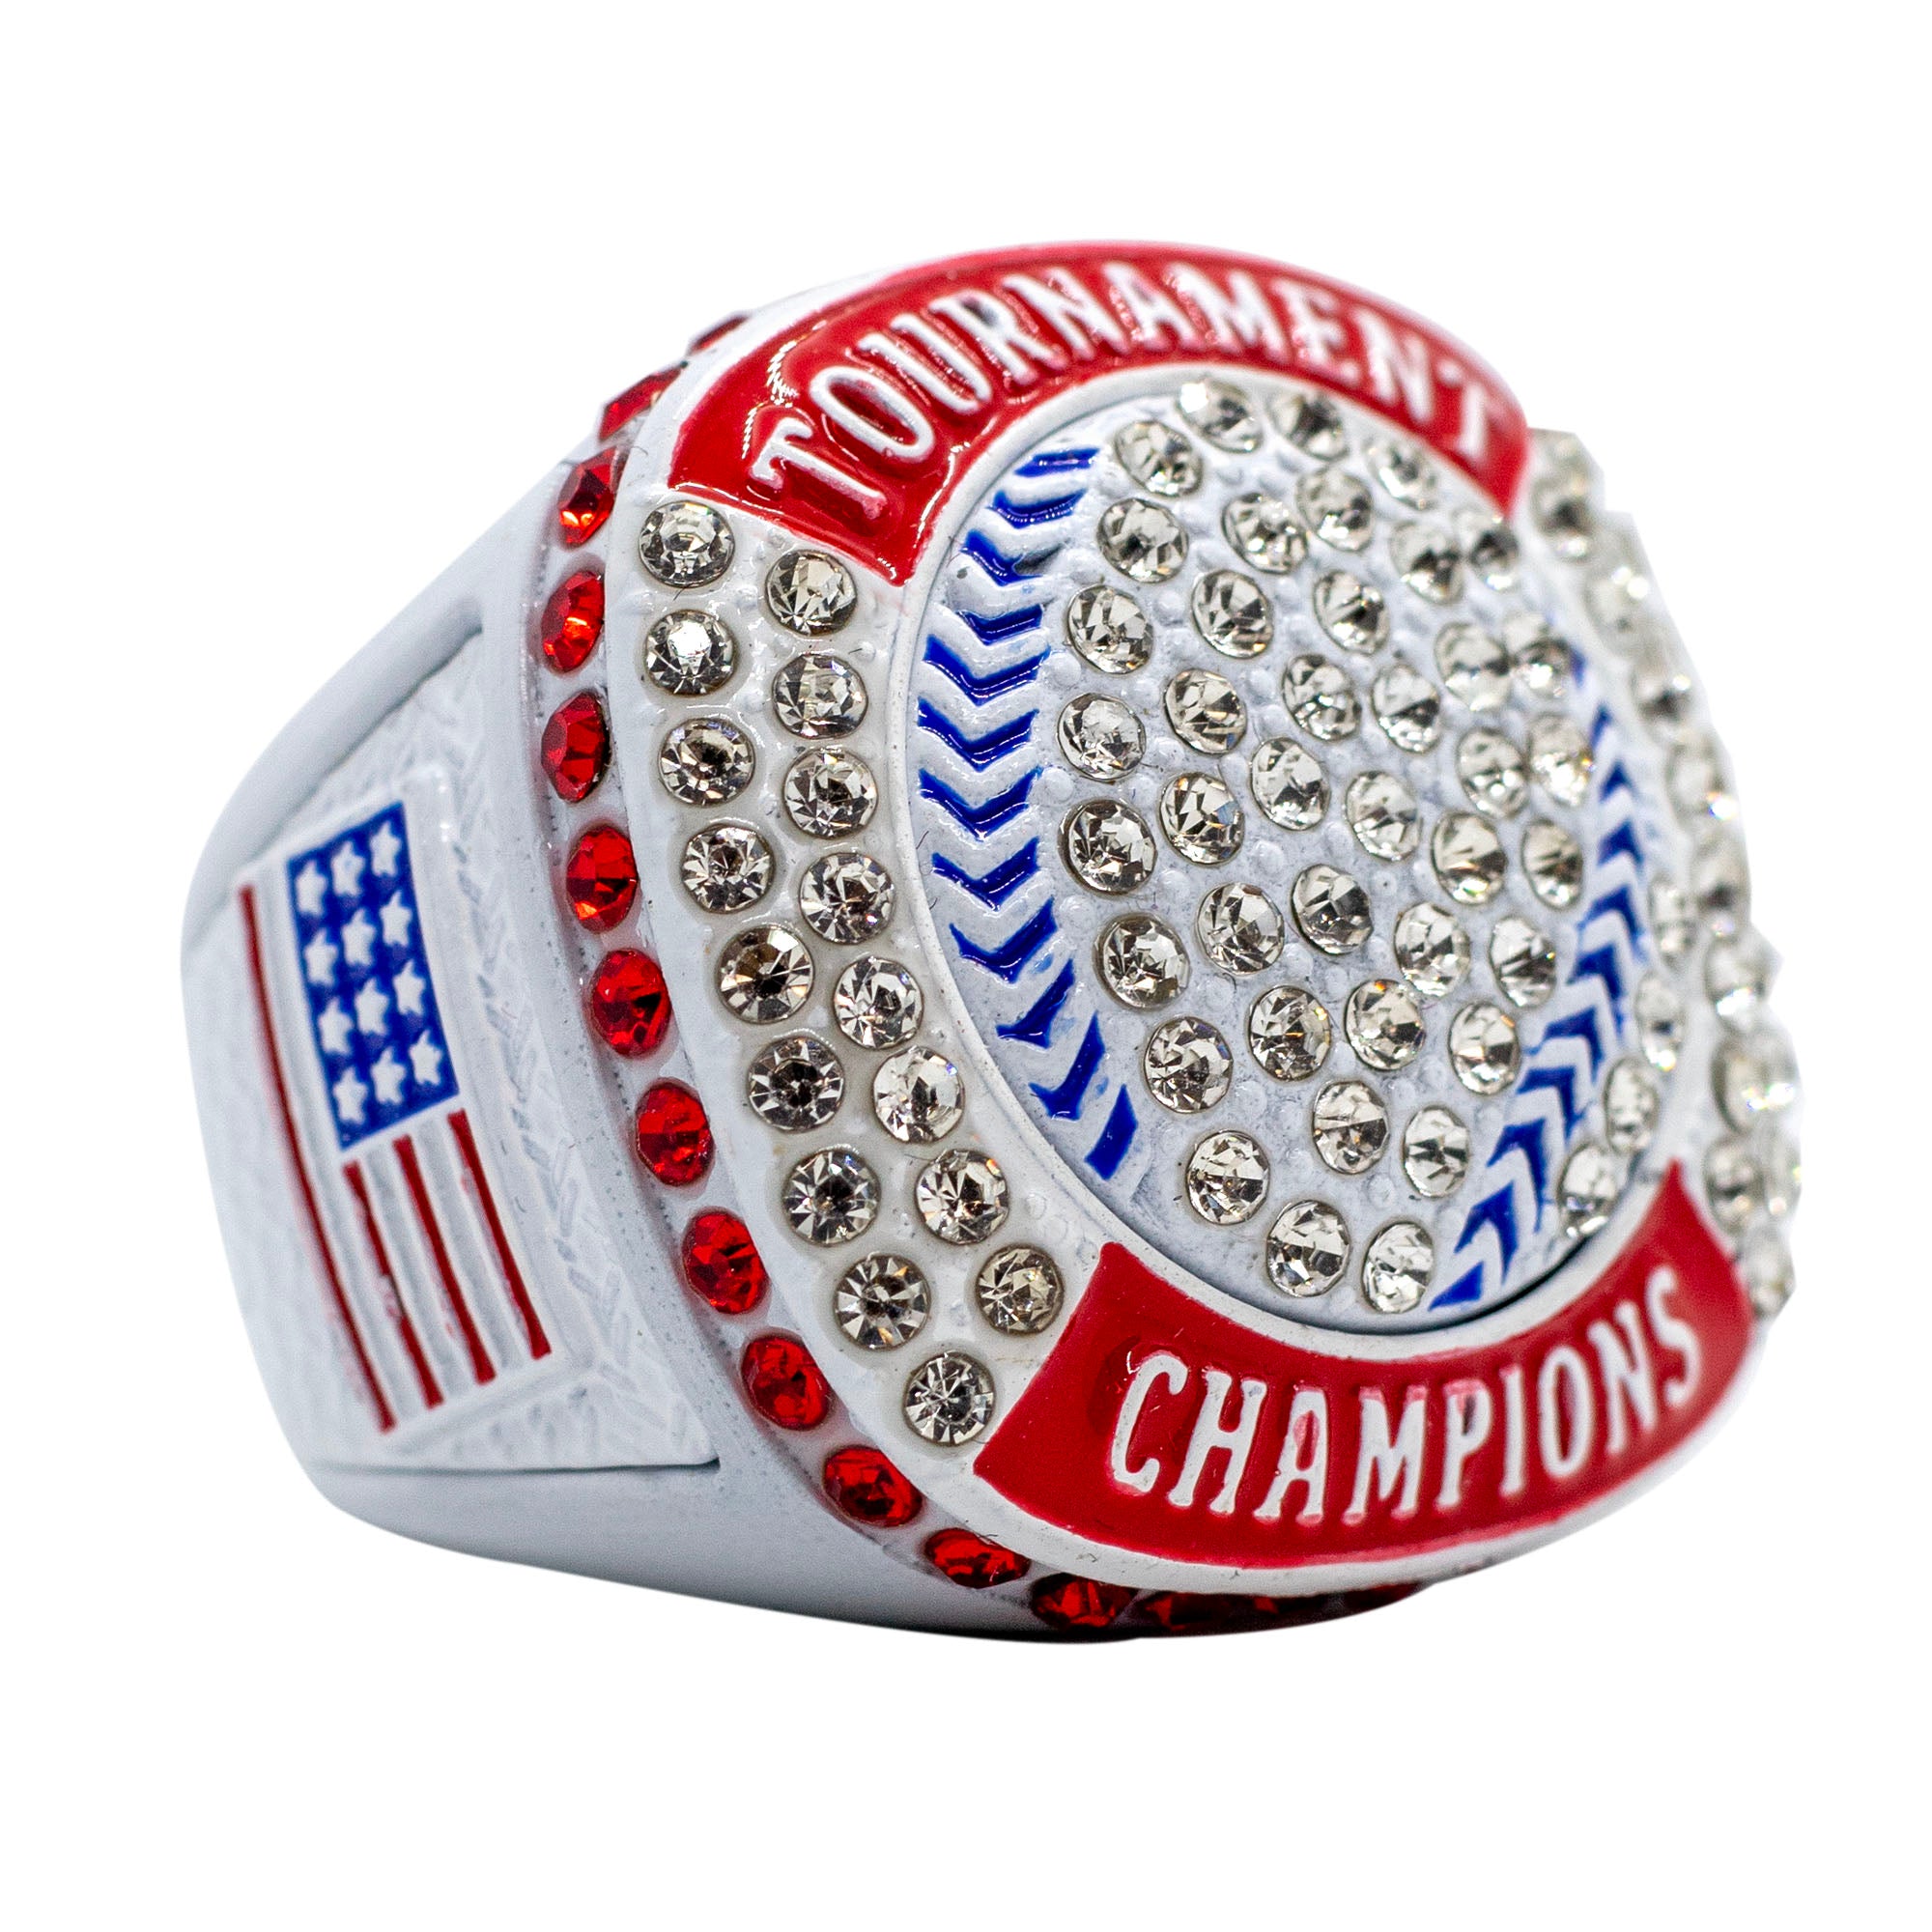 GEN5 WHITEOUT TOURNAMENT CHAMPIONS RING – Bownet Promotions